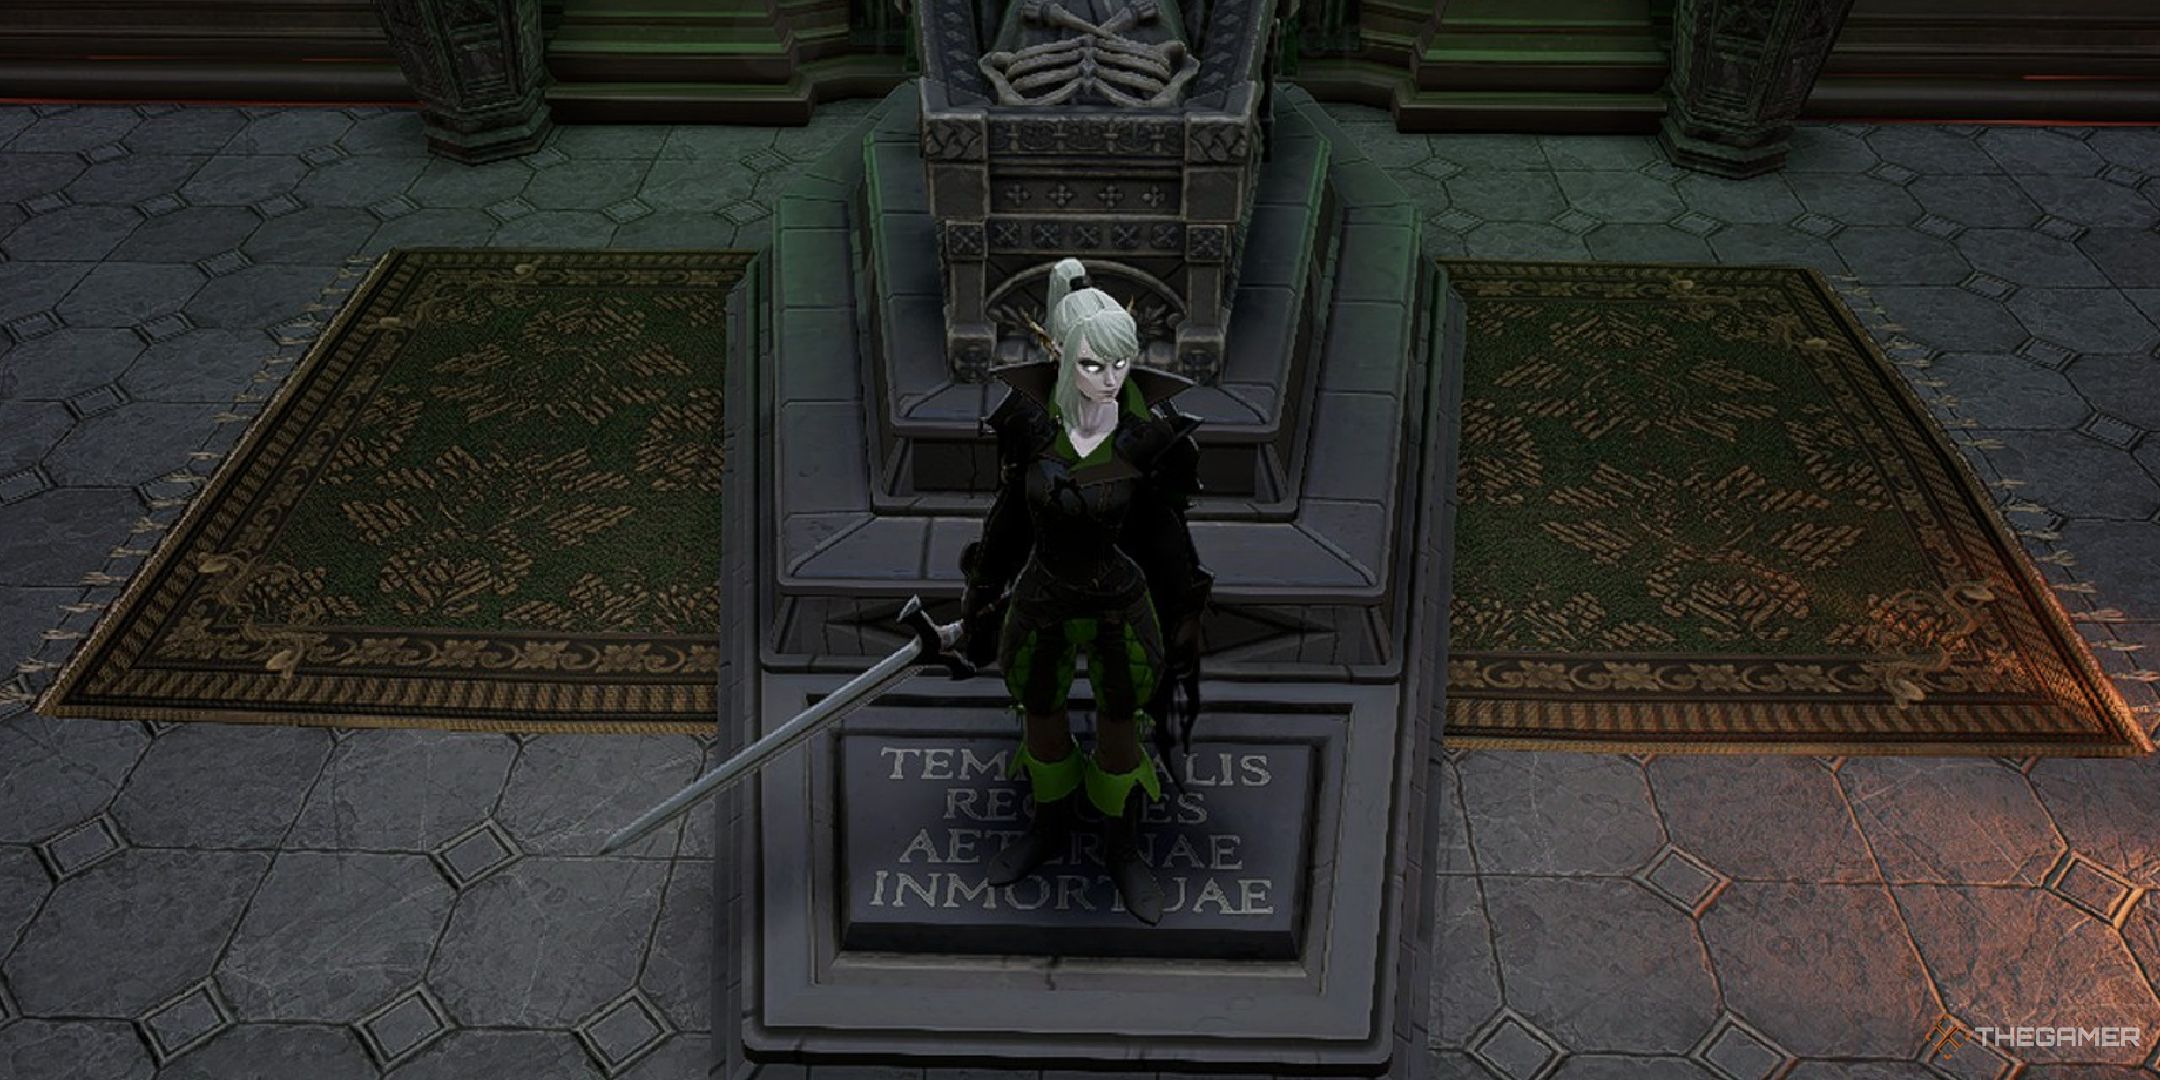 v rising player holding sword while standing on coffin